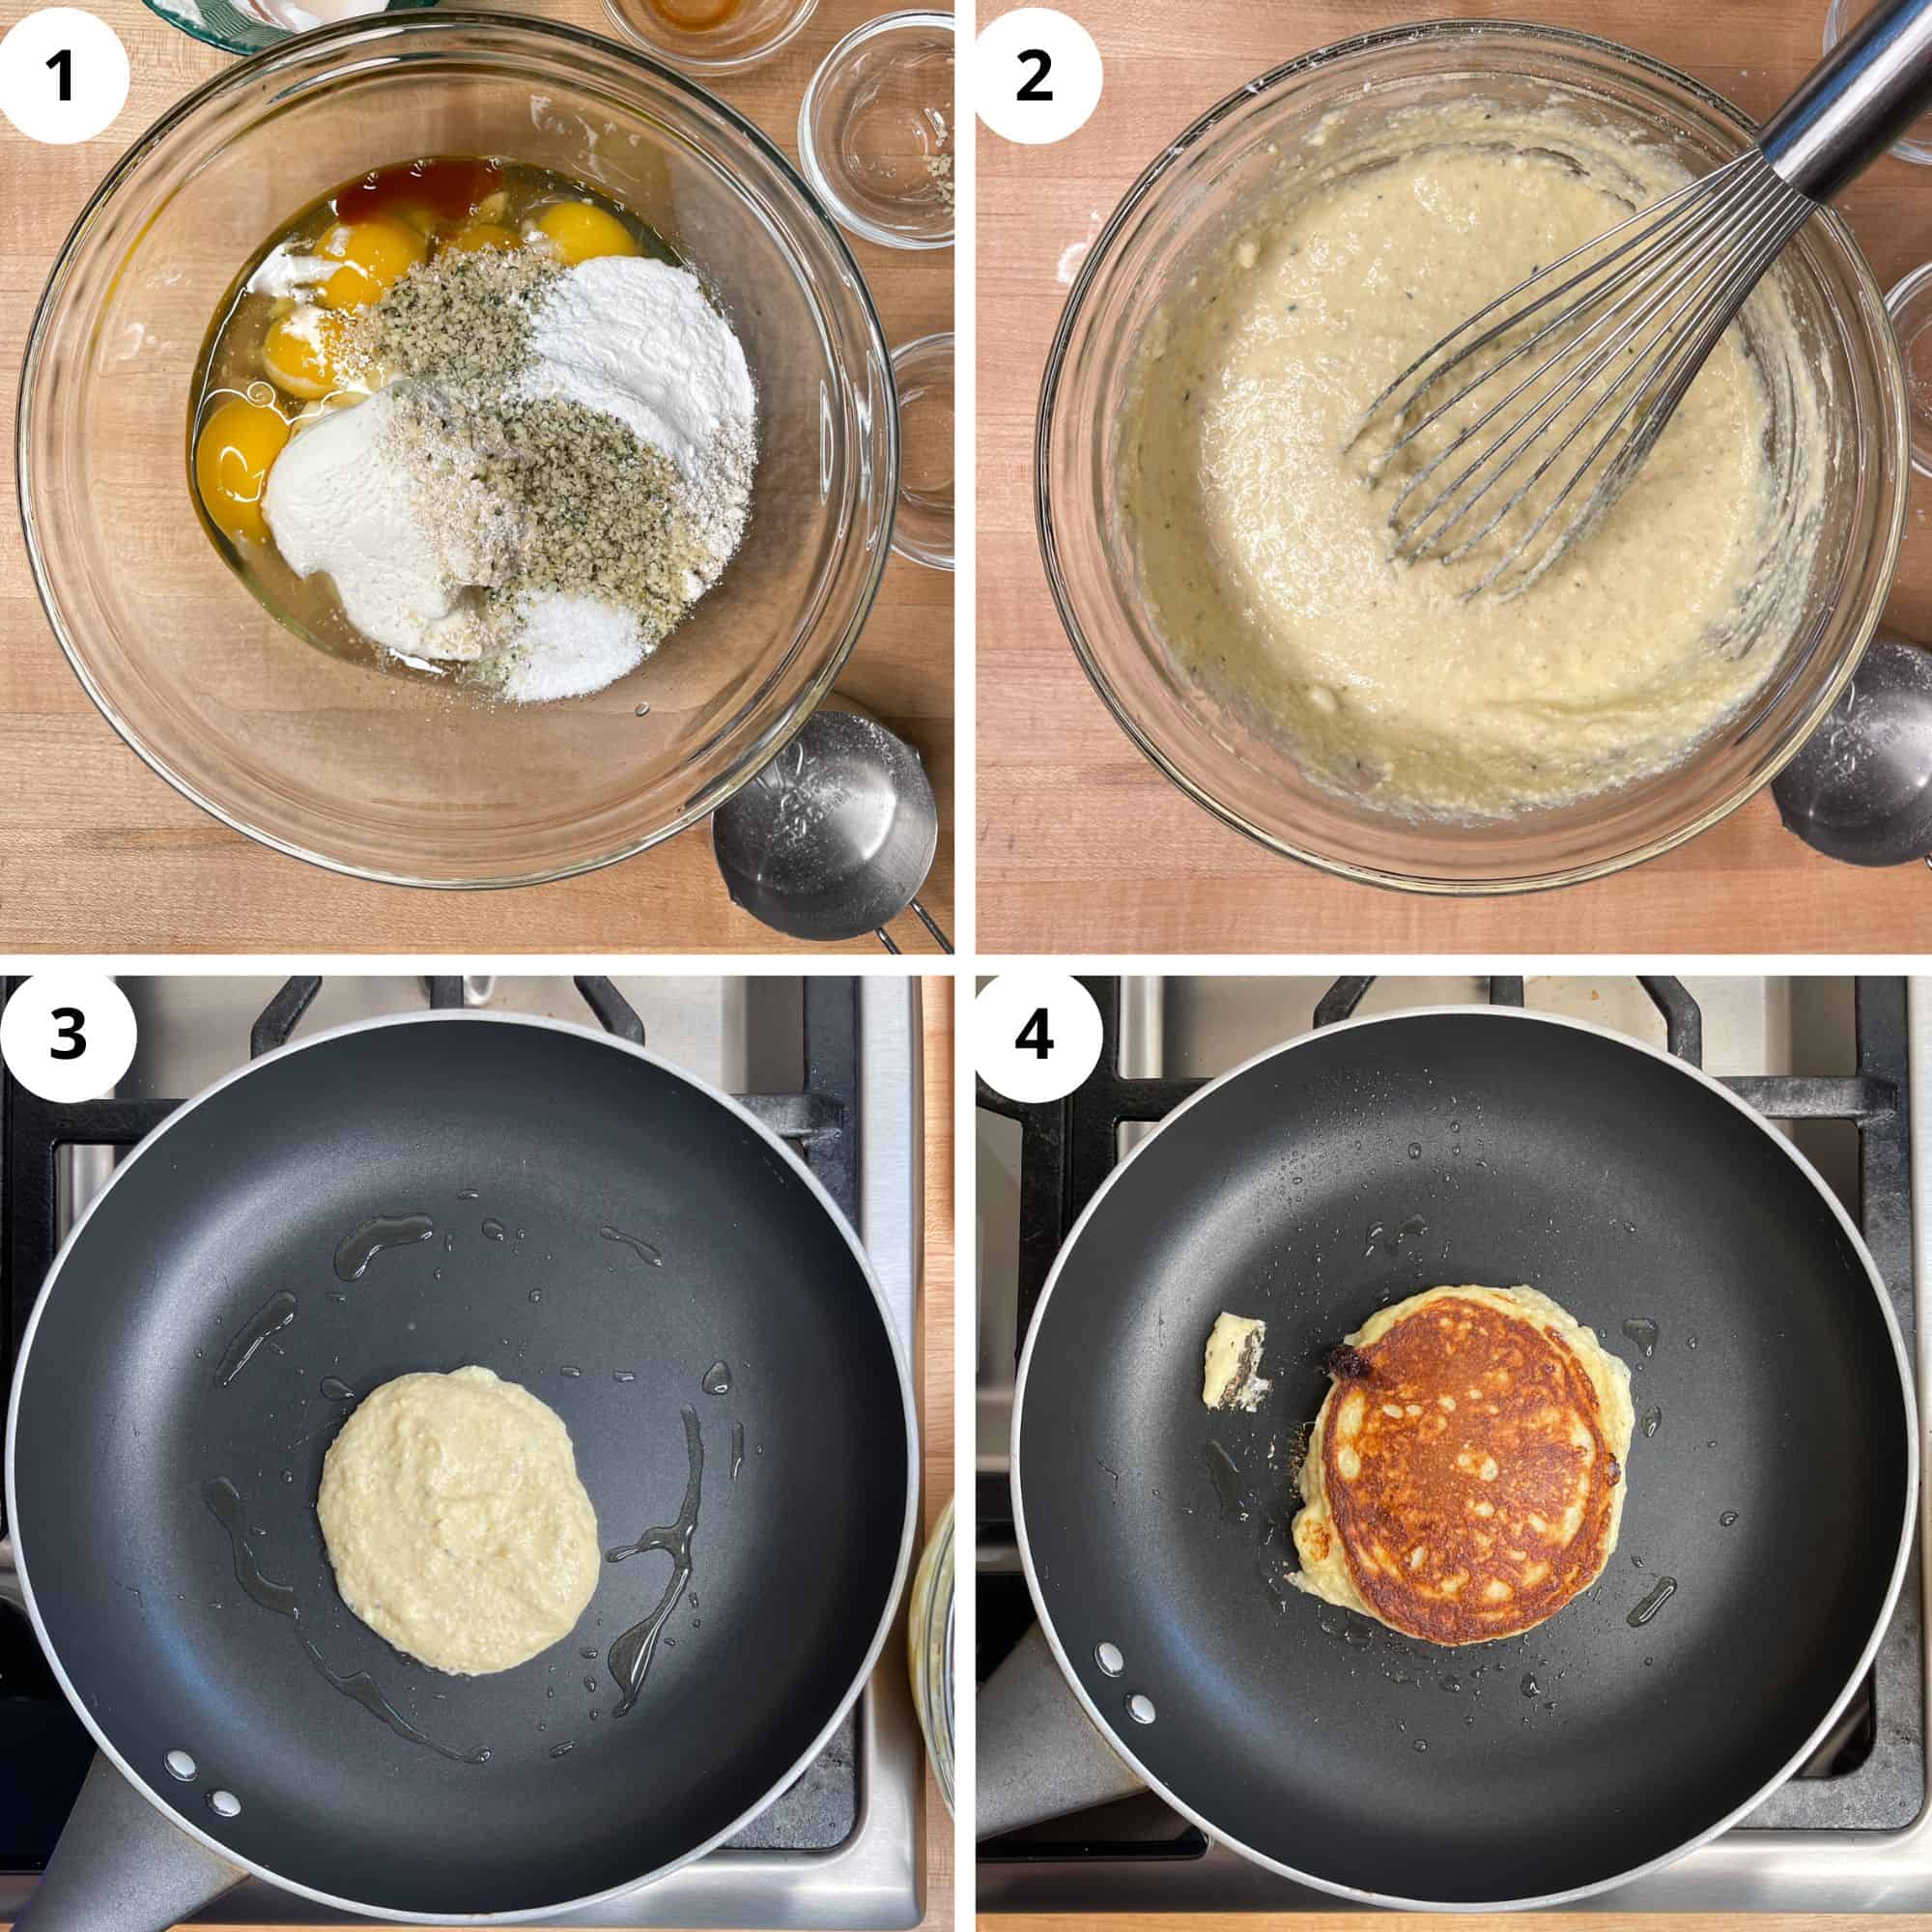 Mix together all the ingredients in a large bowl. Heat a small amount of oil in a non-stick frying pan and scoop ¼ cup of batter into pan. Cook for 2 minutes on each side. 